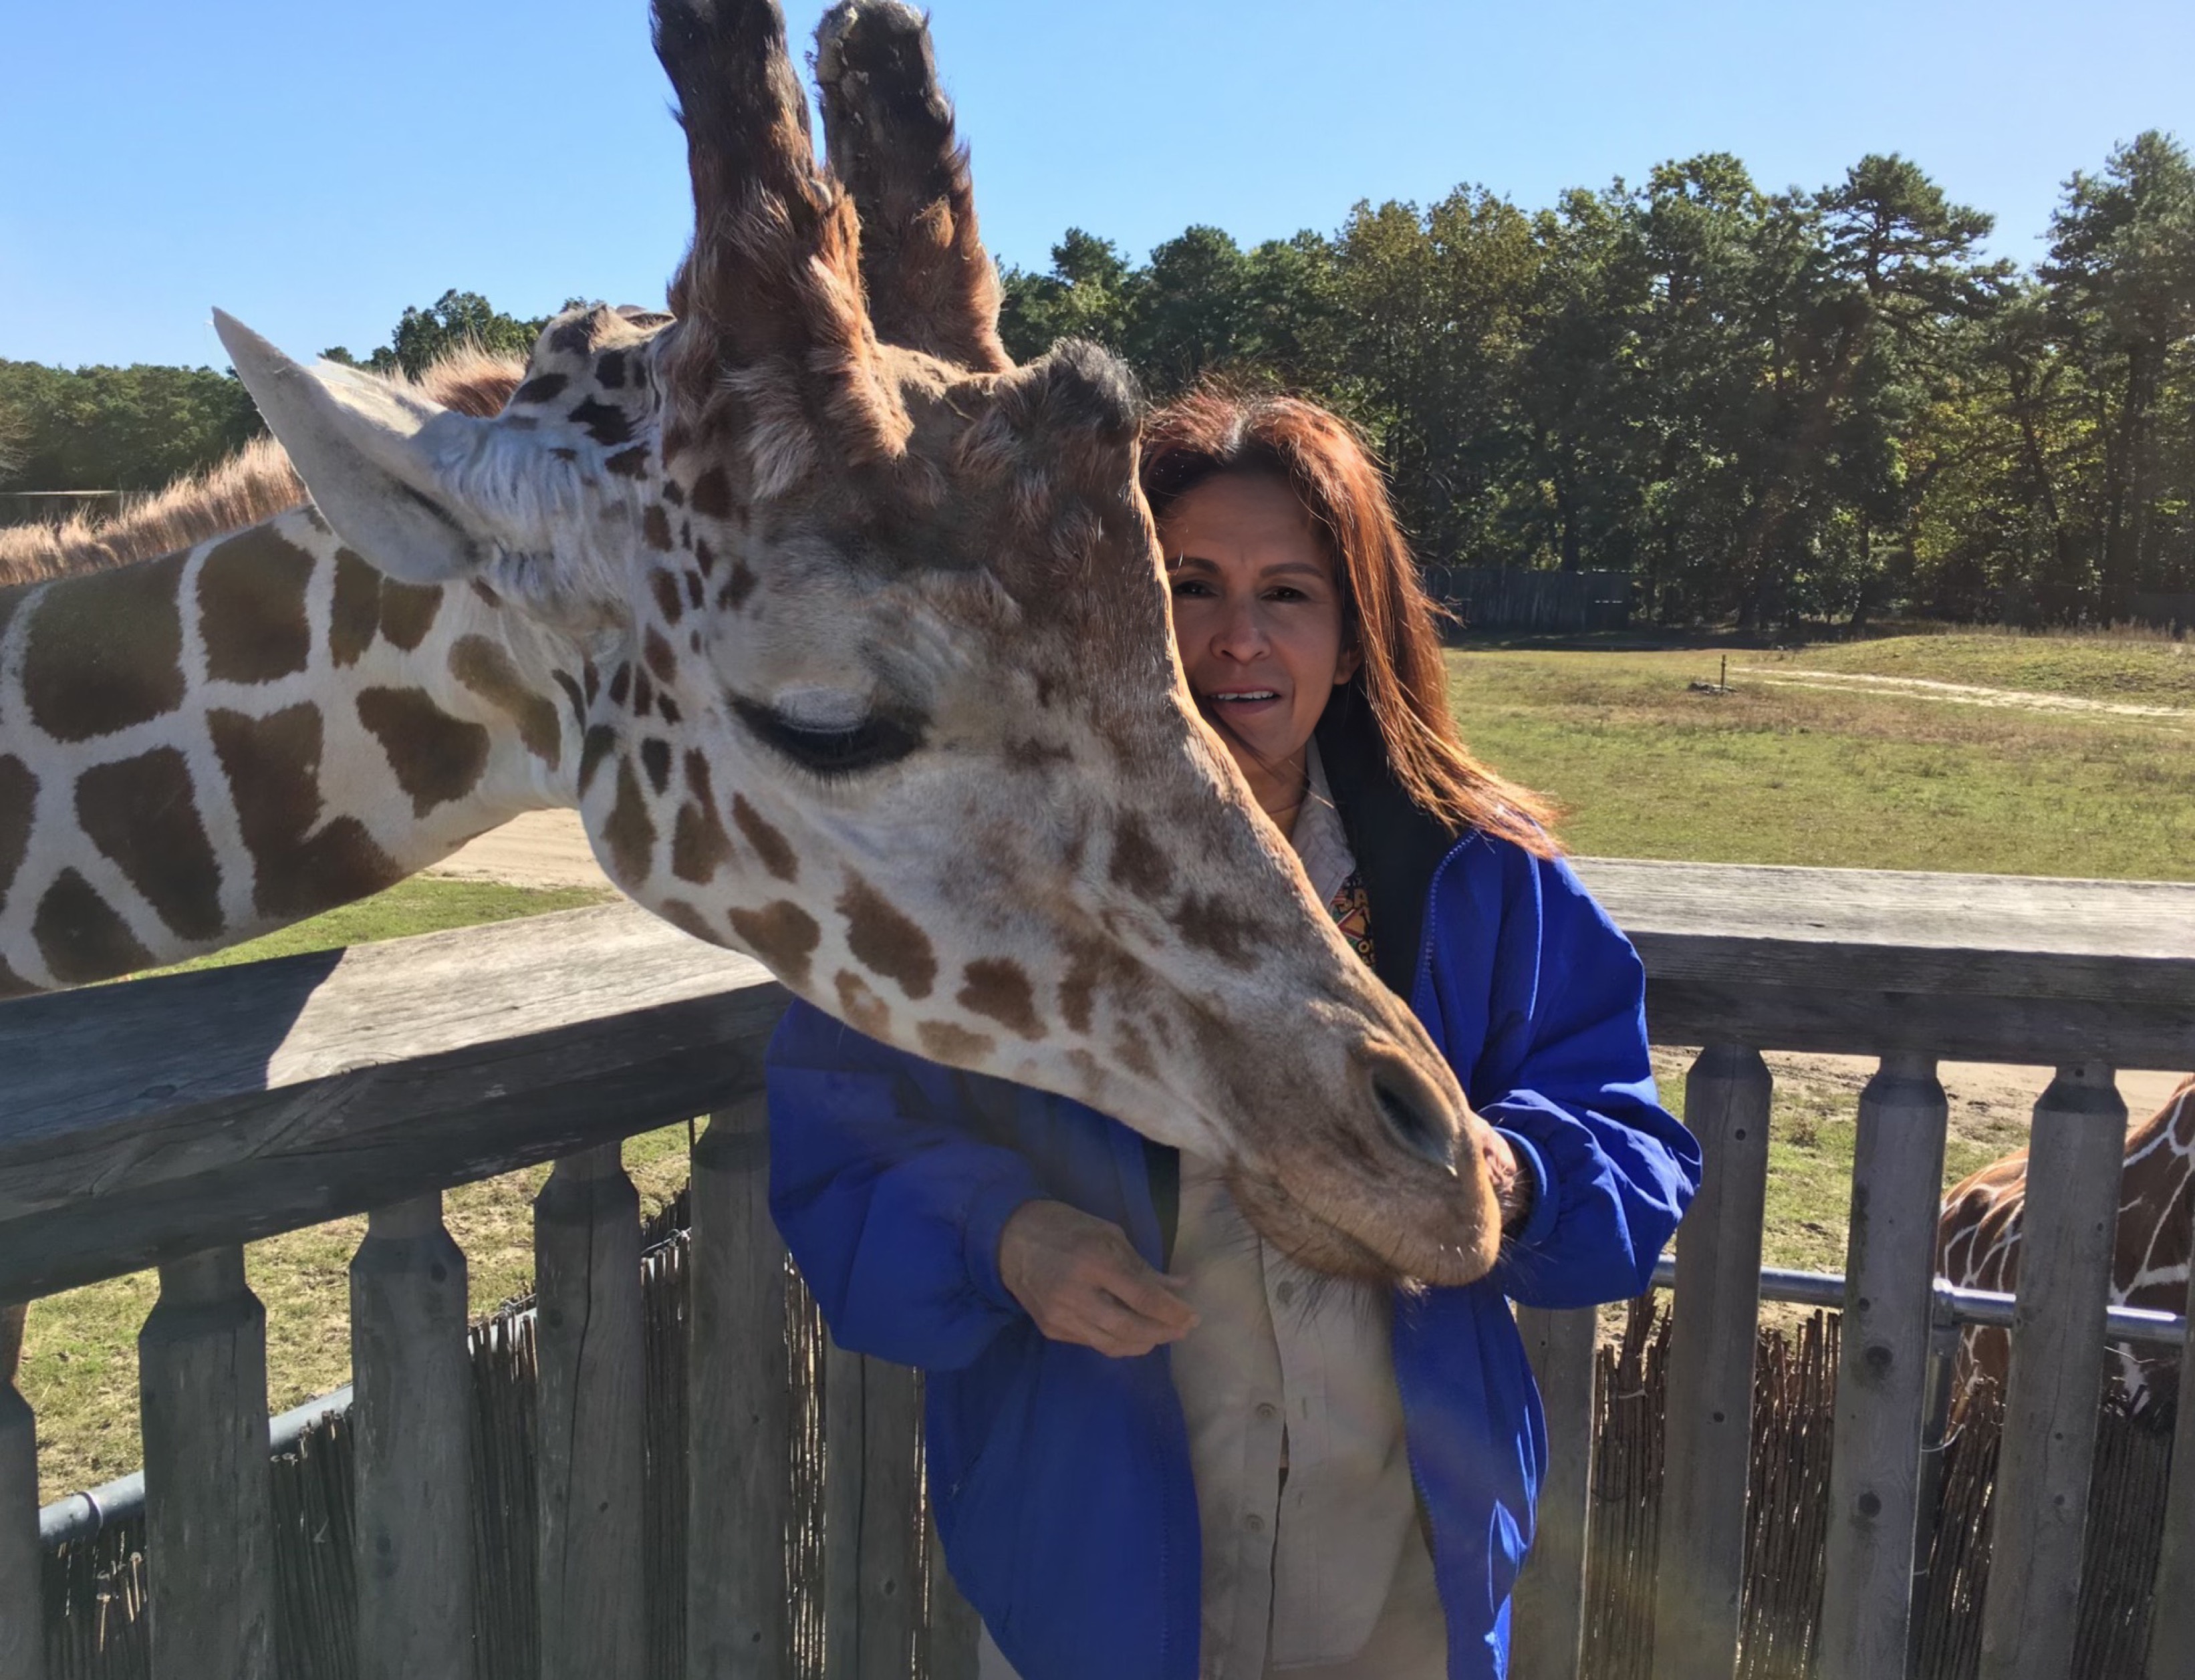 The Giraffe Seems To Really Like Her. What A Very Passive Creature, Very Beautiful 🦒🏞️👩😘❤️😞💔😡☦️🇺🇸  Six Flags Great Adventure Jackson, NJ 2014